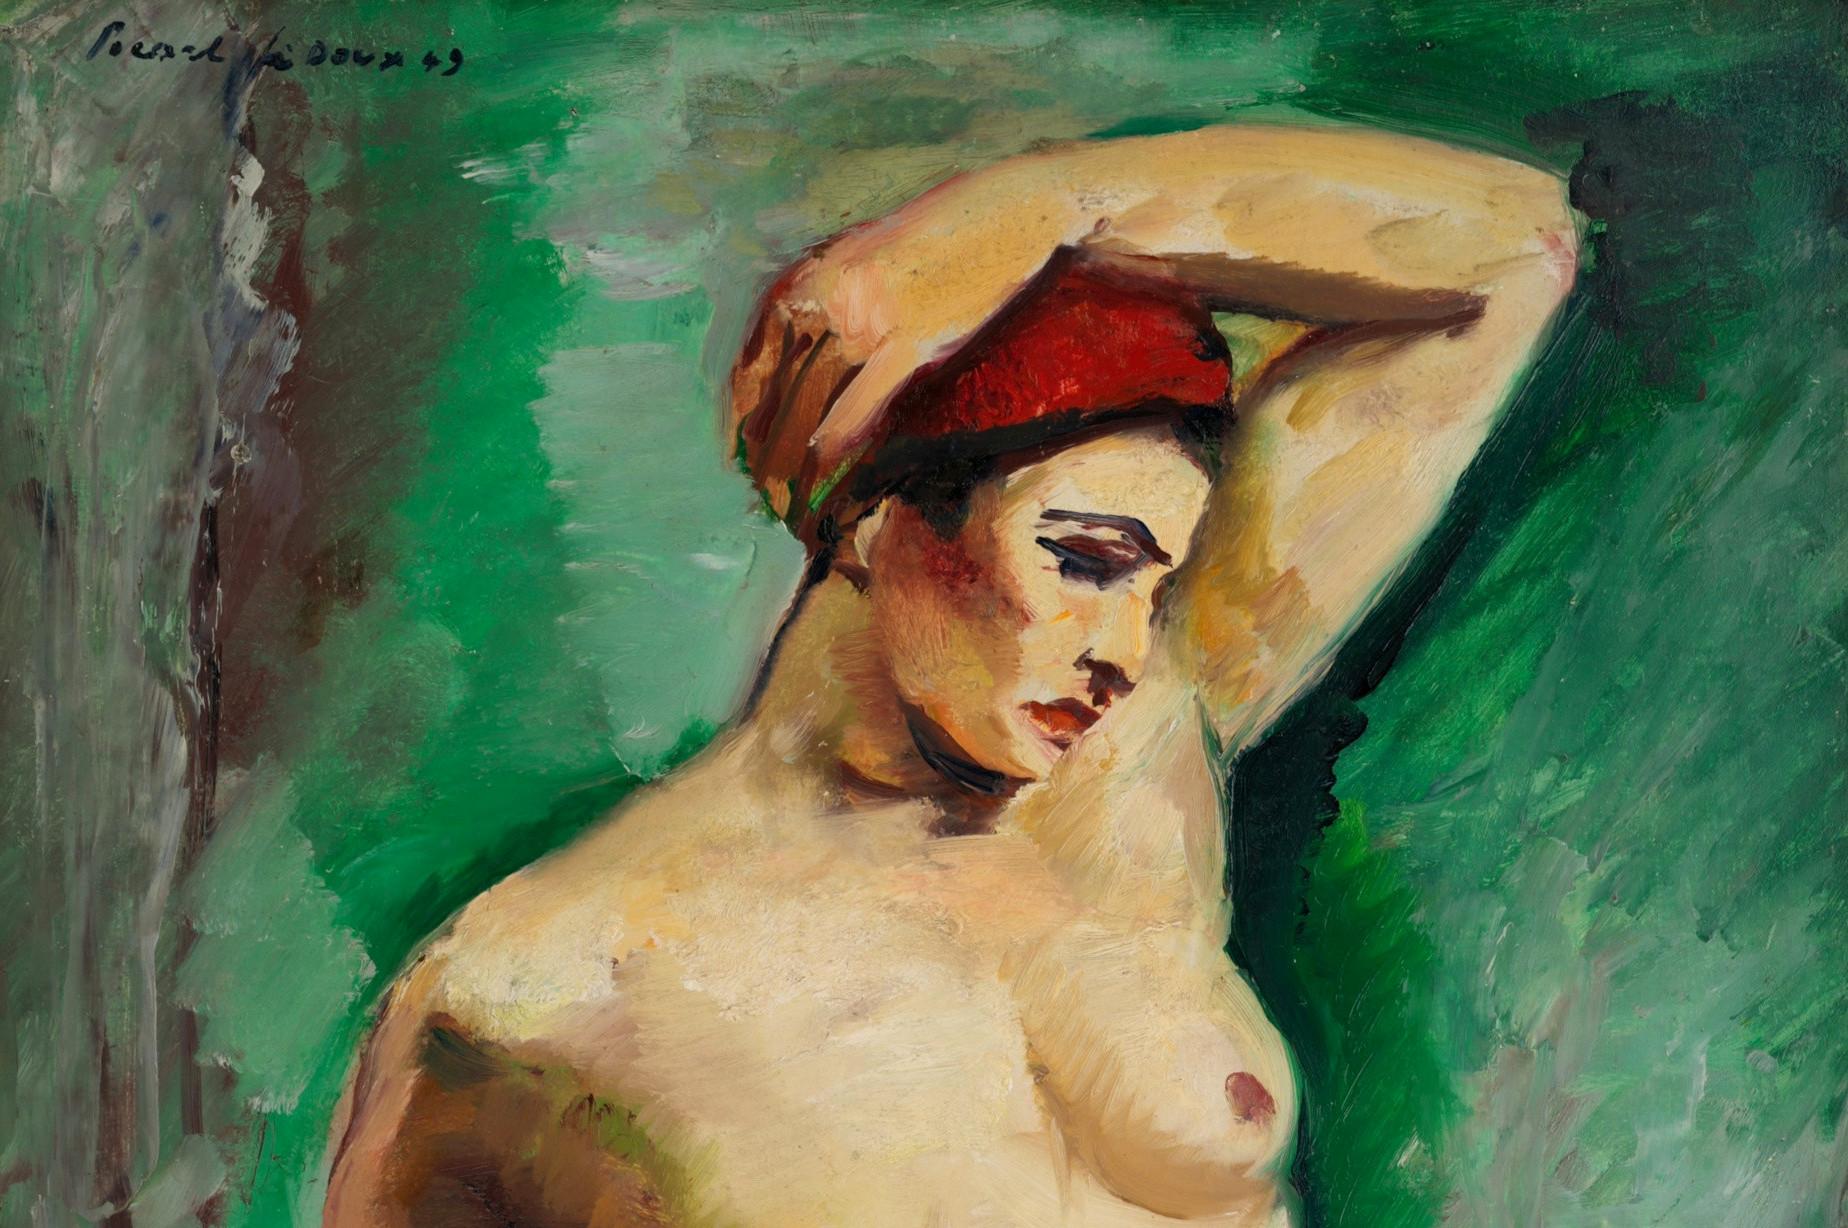 Charles PICART LE DOUX, Model on Green Background, Oil on Isorel, 1949 - Post-Impressionist Painting by Charles Picart le Doux